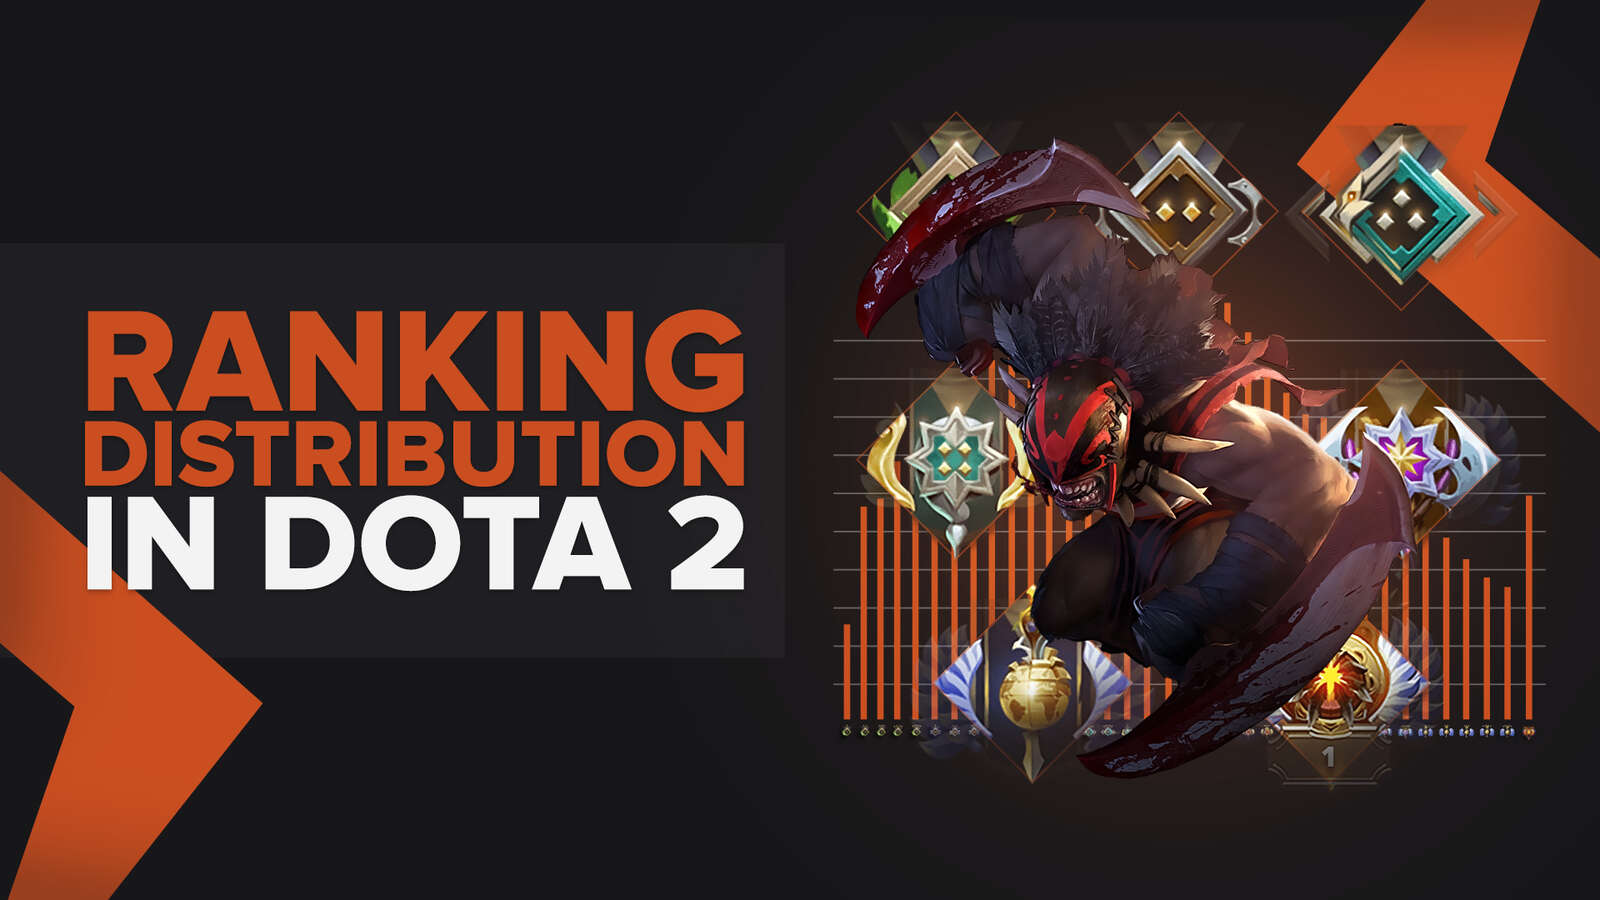 What Is The Dota 2 Ranking Distribution & Percentile In The Current Season By Medal?